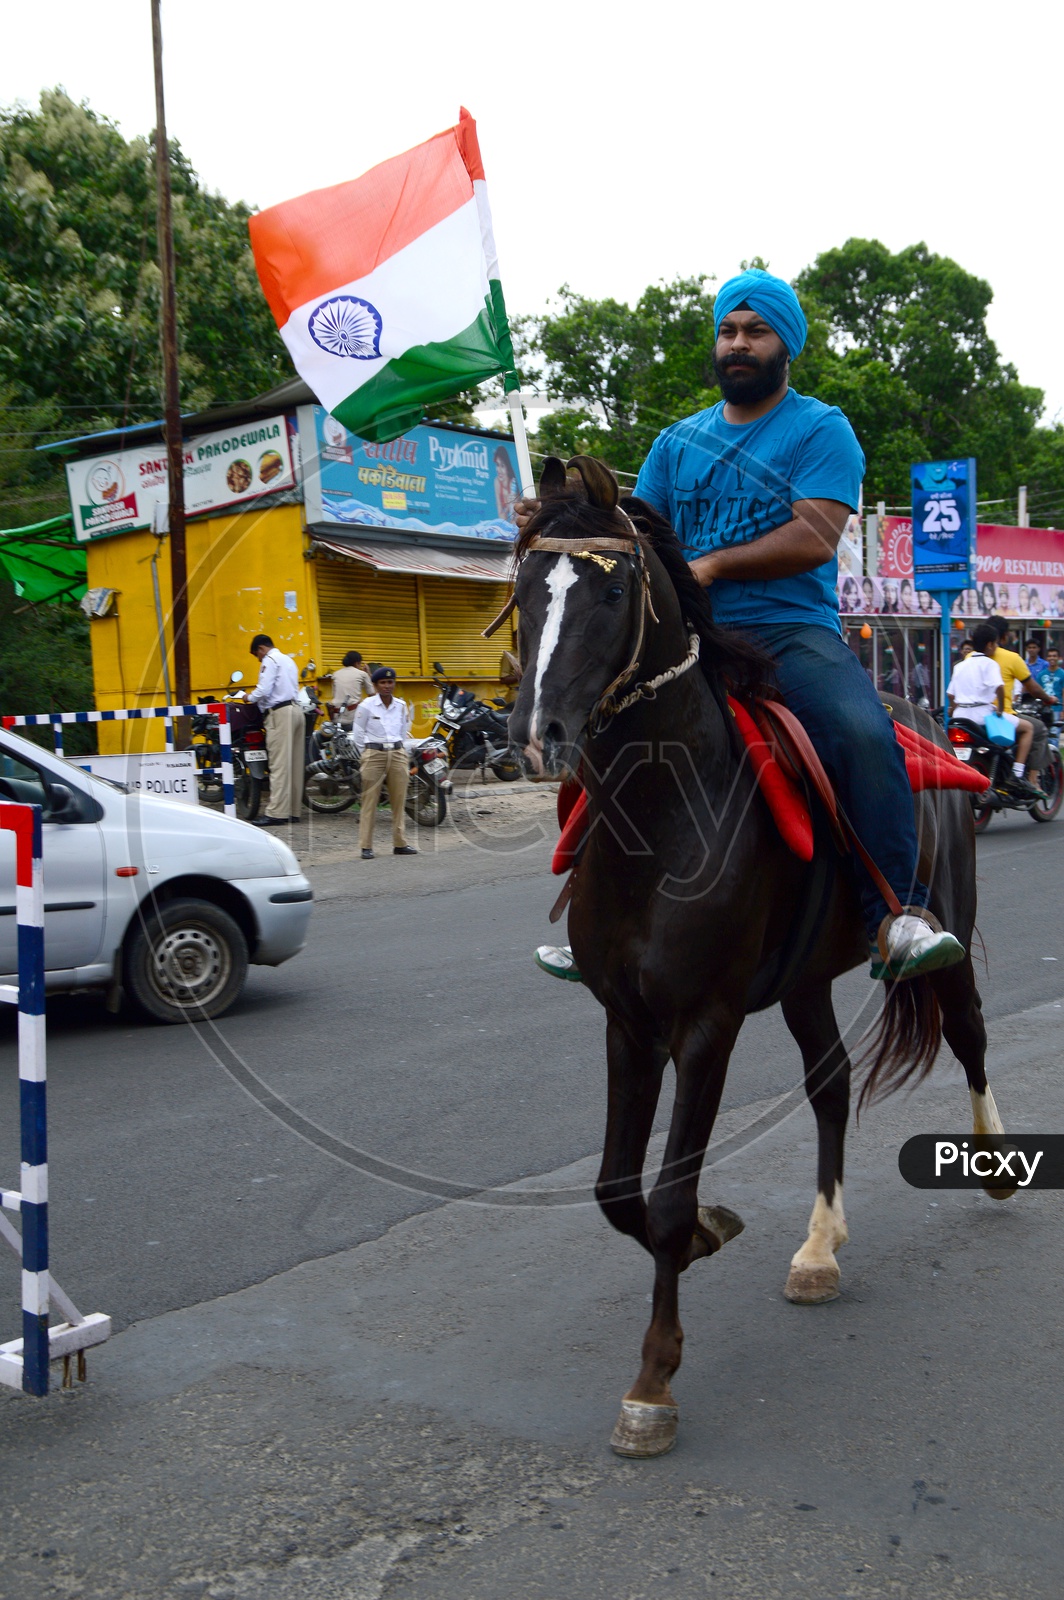 A Sikh Man With Indian National Flag Riding a Horse